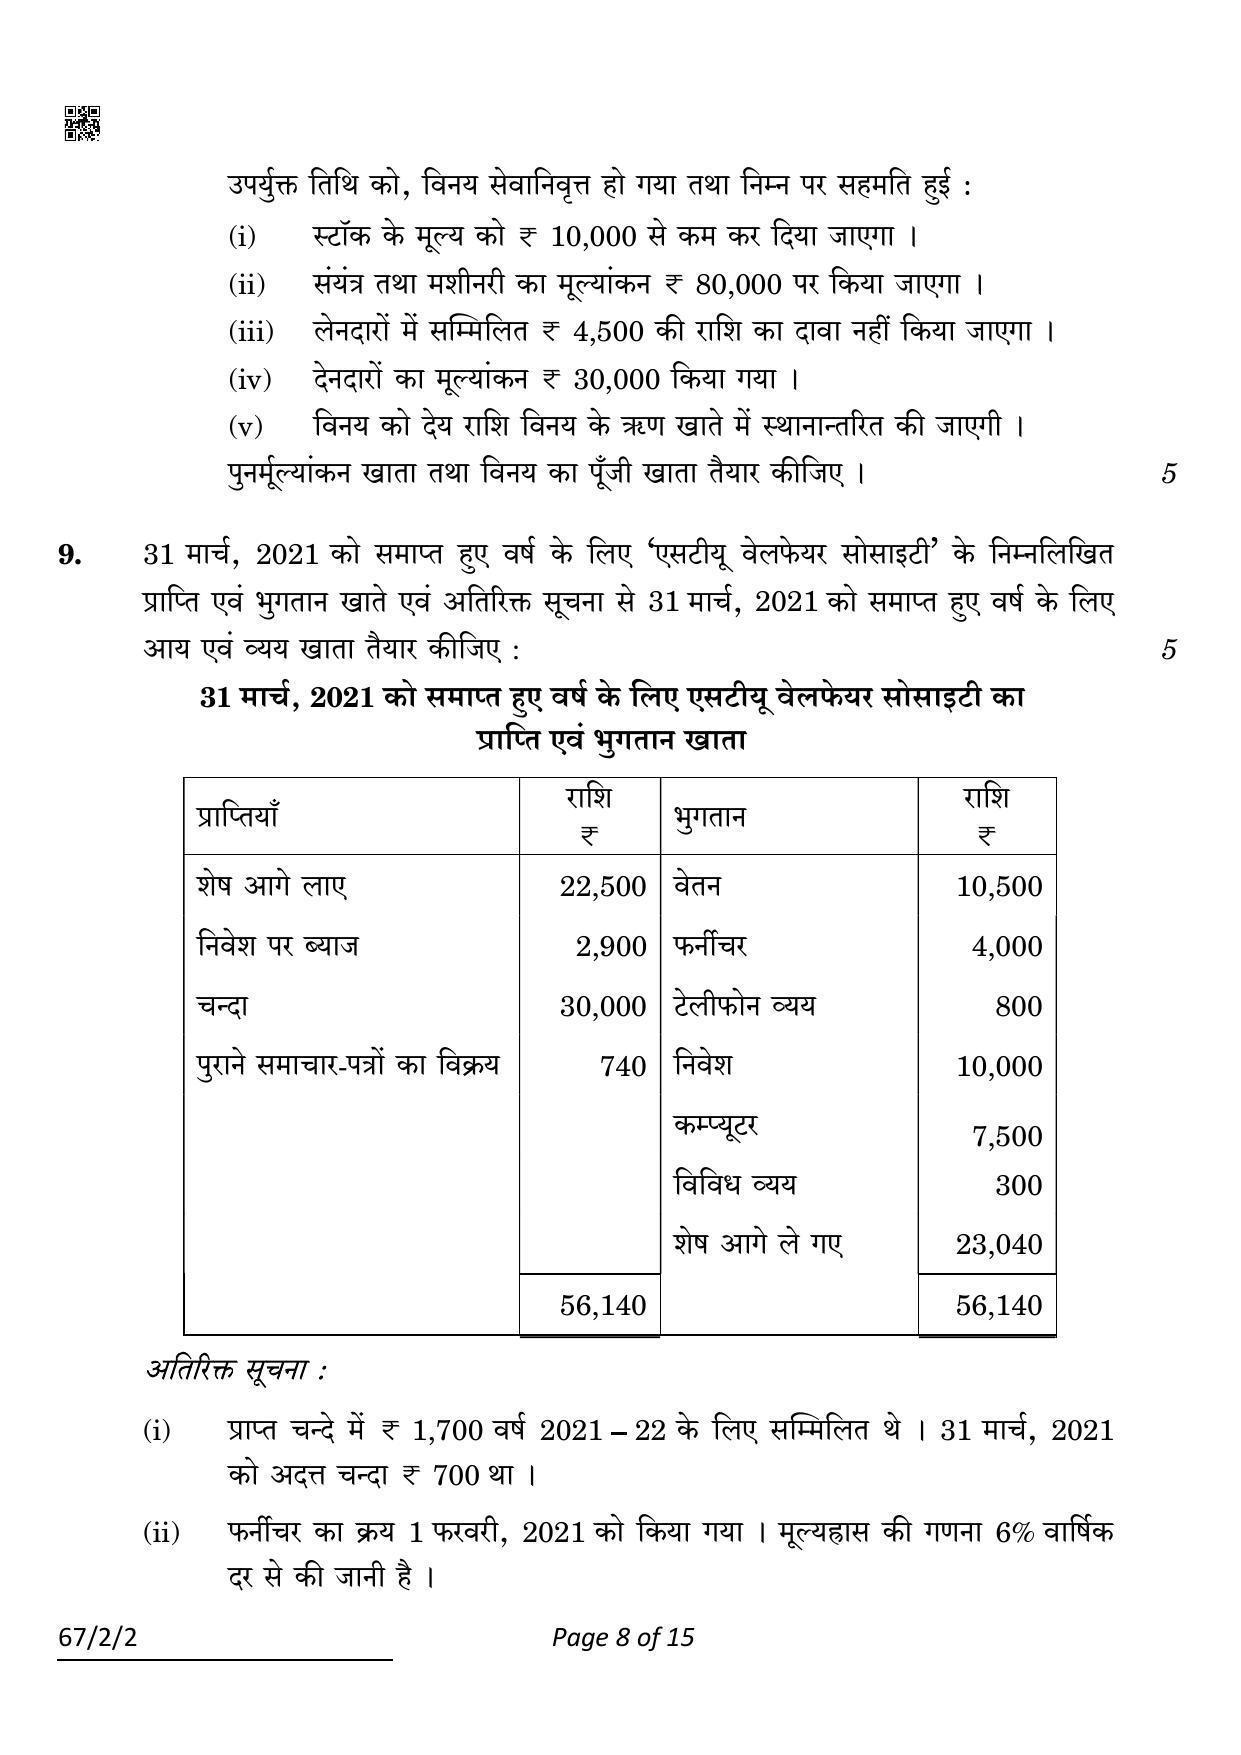 CBSE Class 12 67-2-2 Accountancy 2022 Question Paper - Page 8